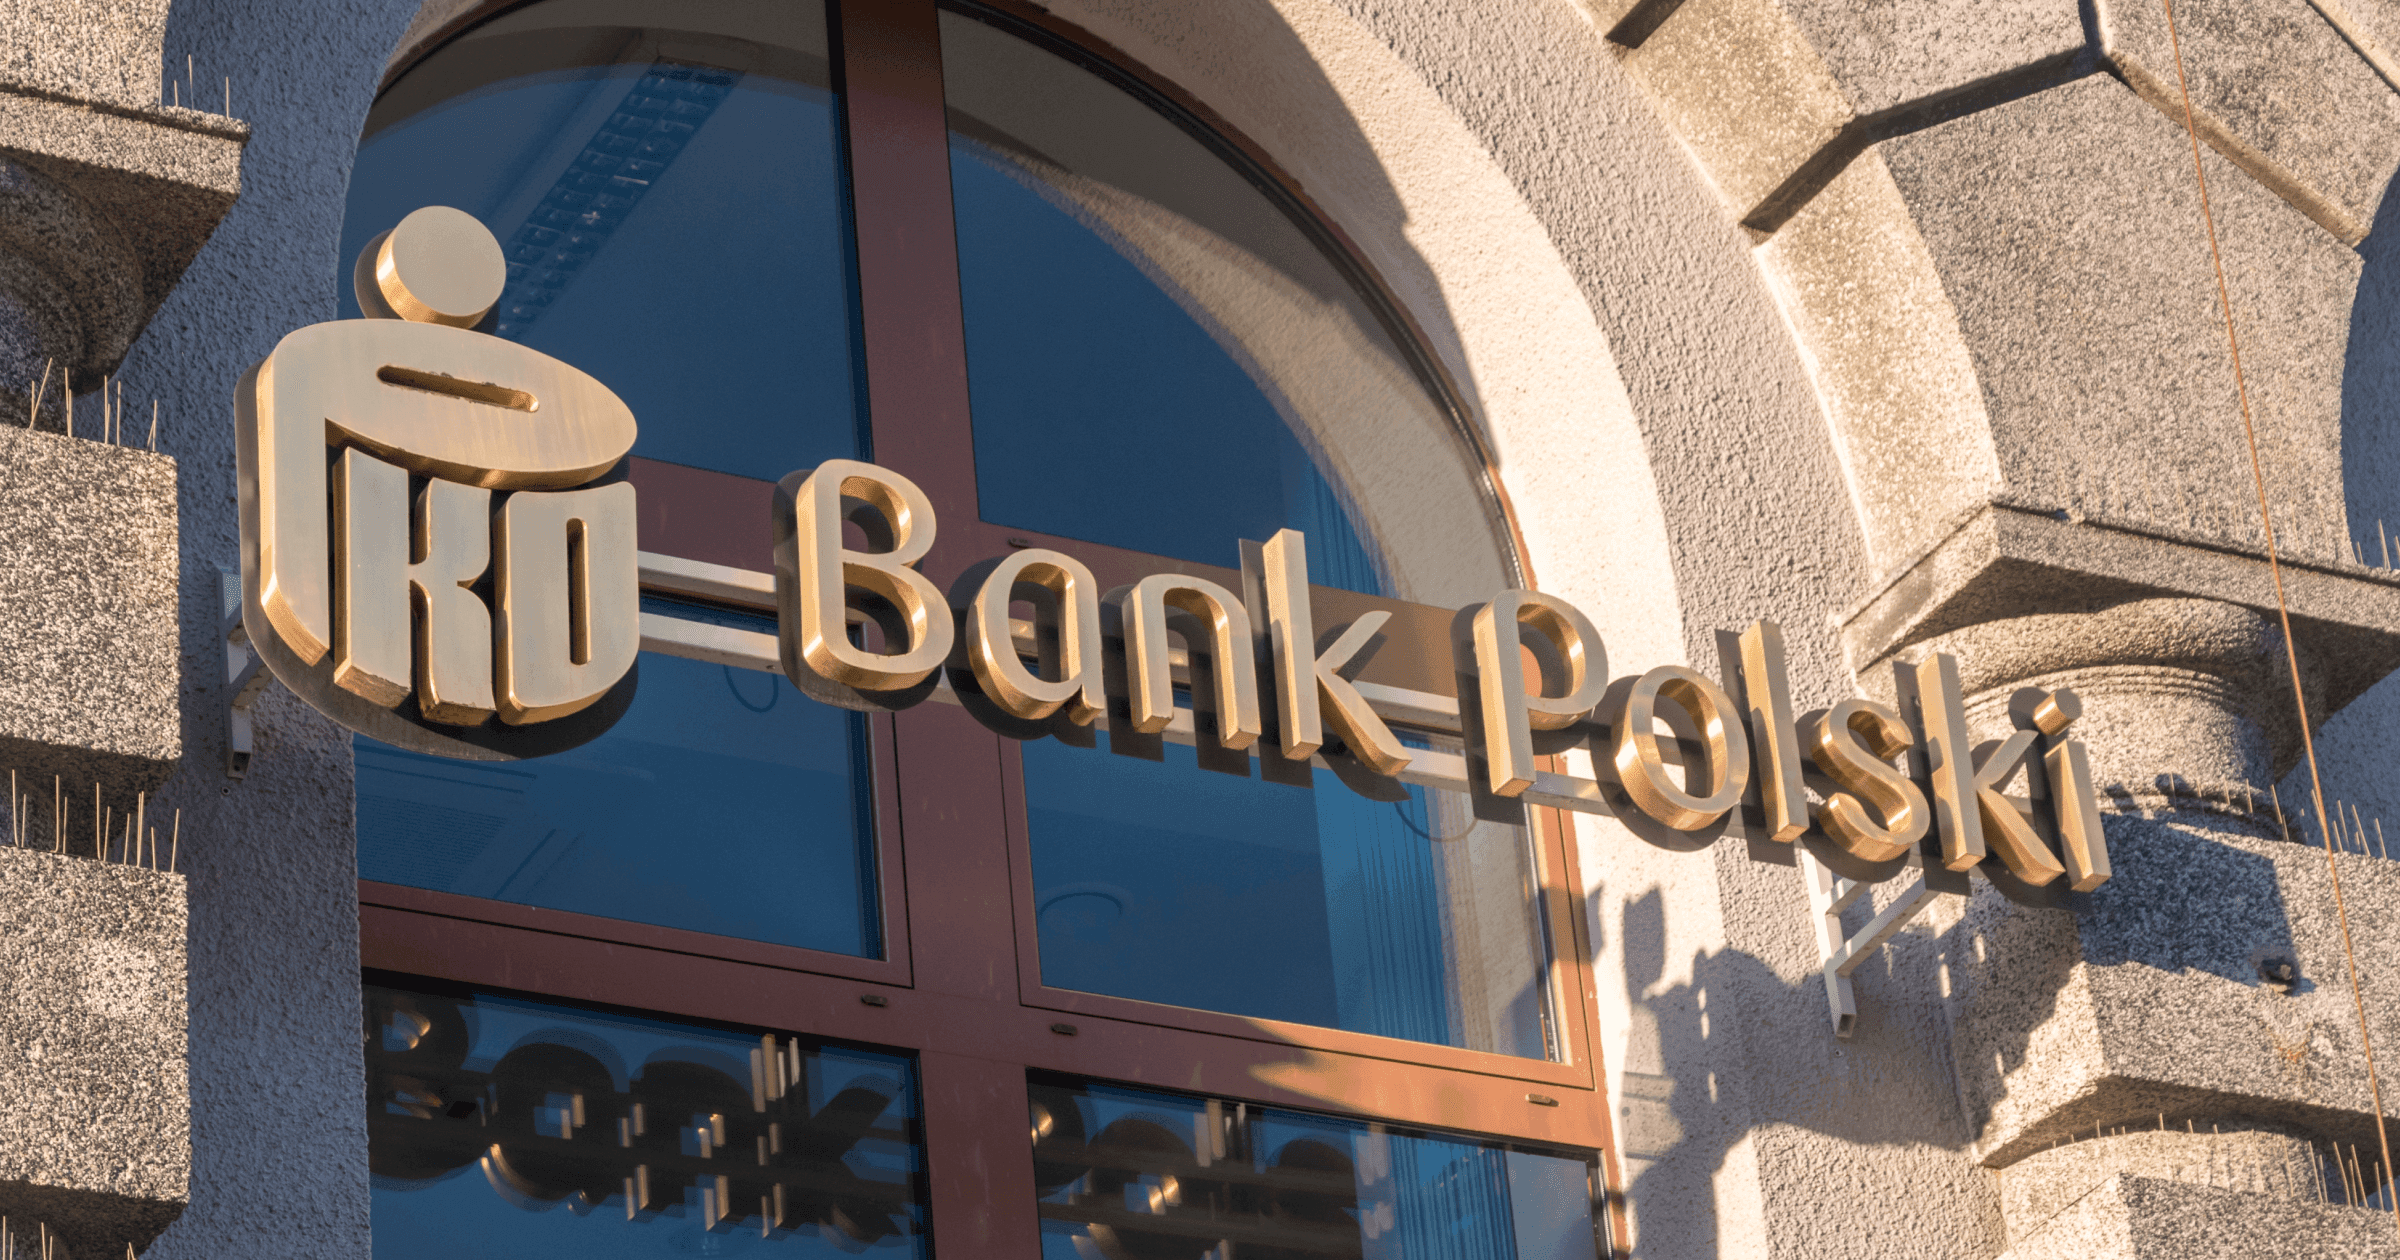 Where to exchange currency in Poland